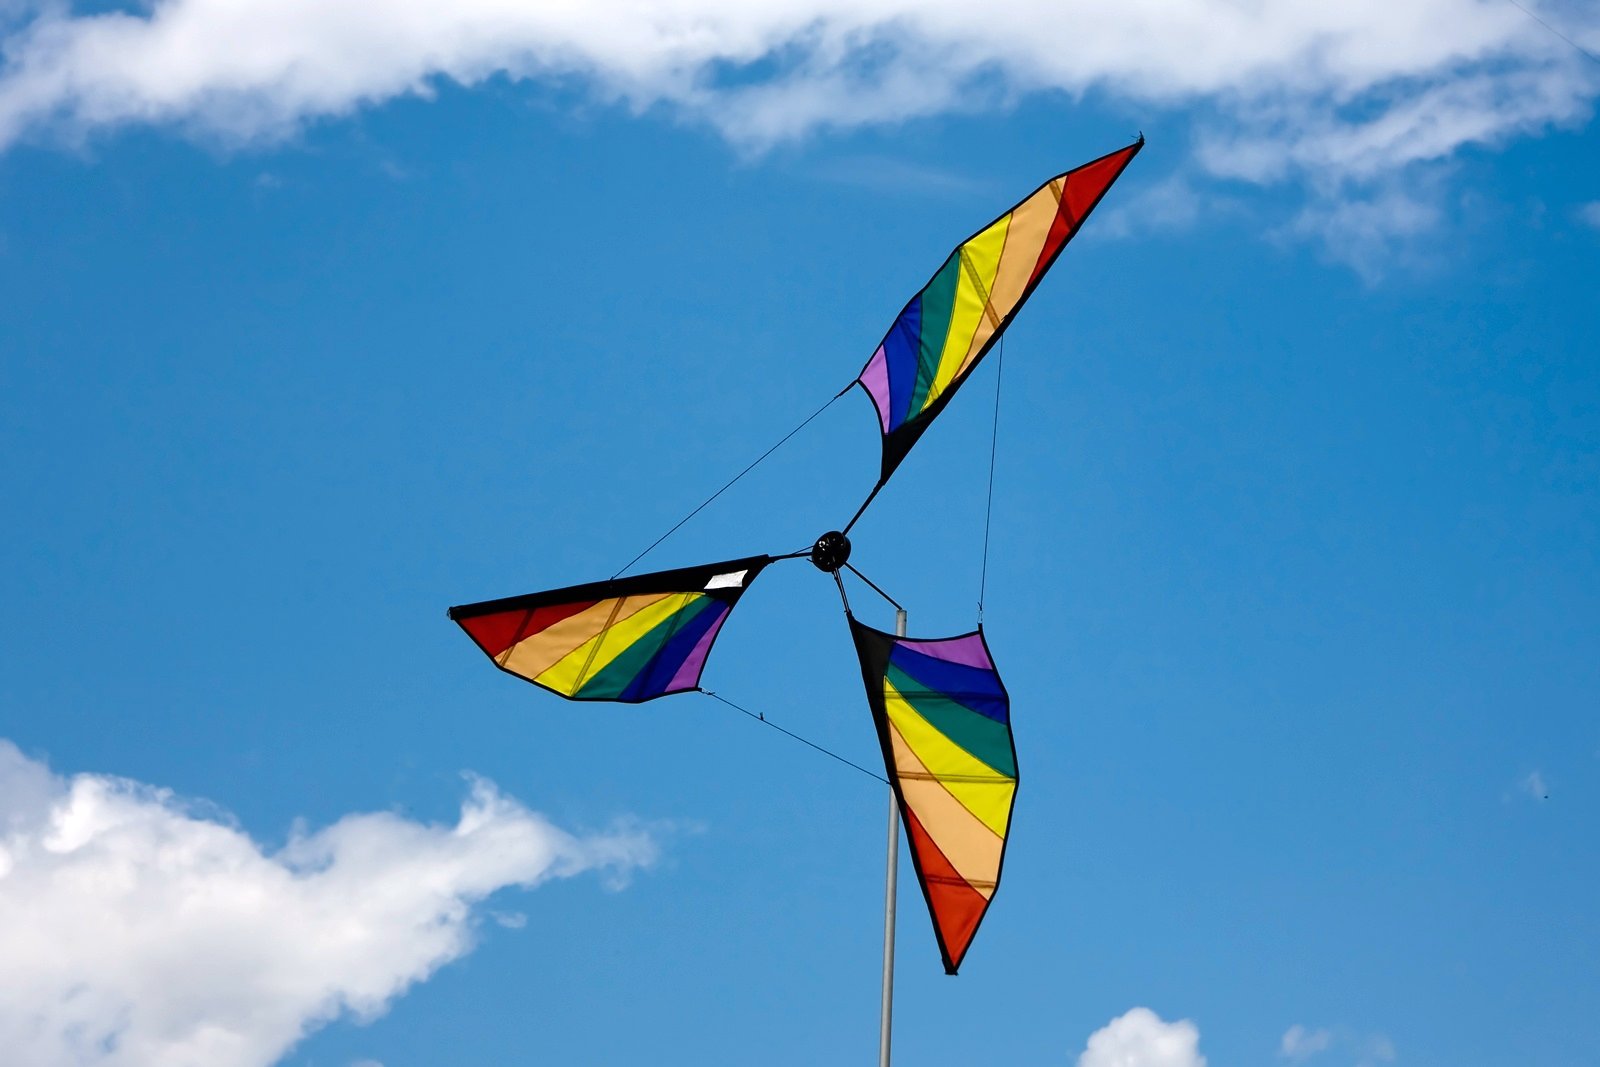 a close up of two kites in the sky